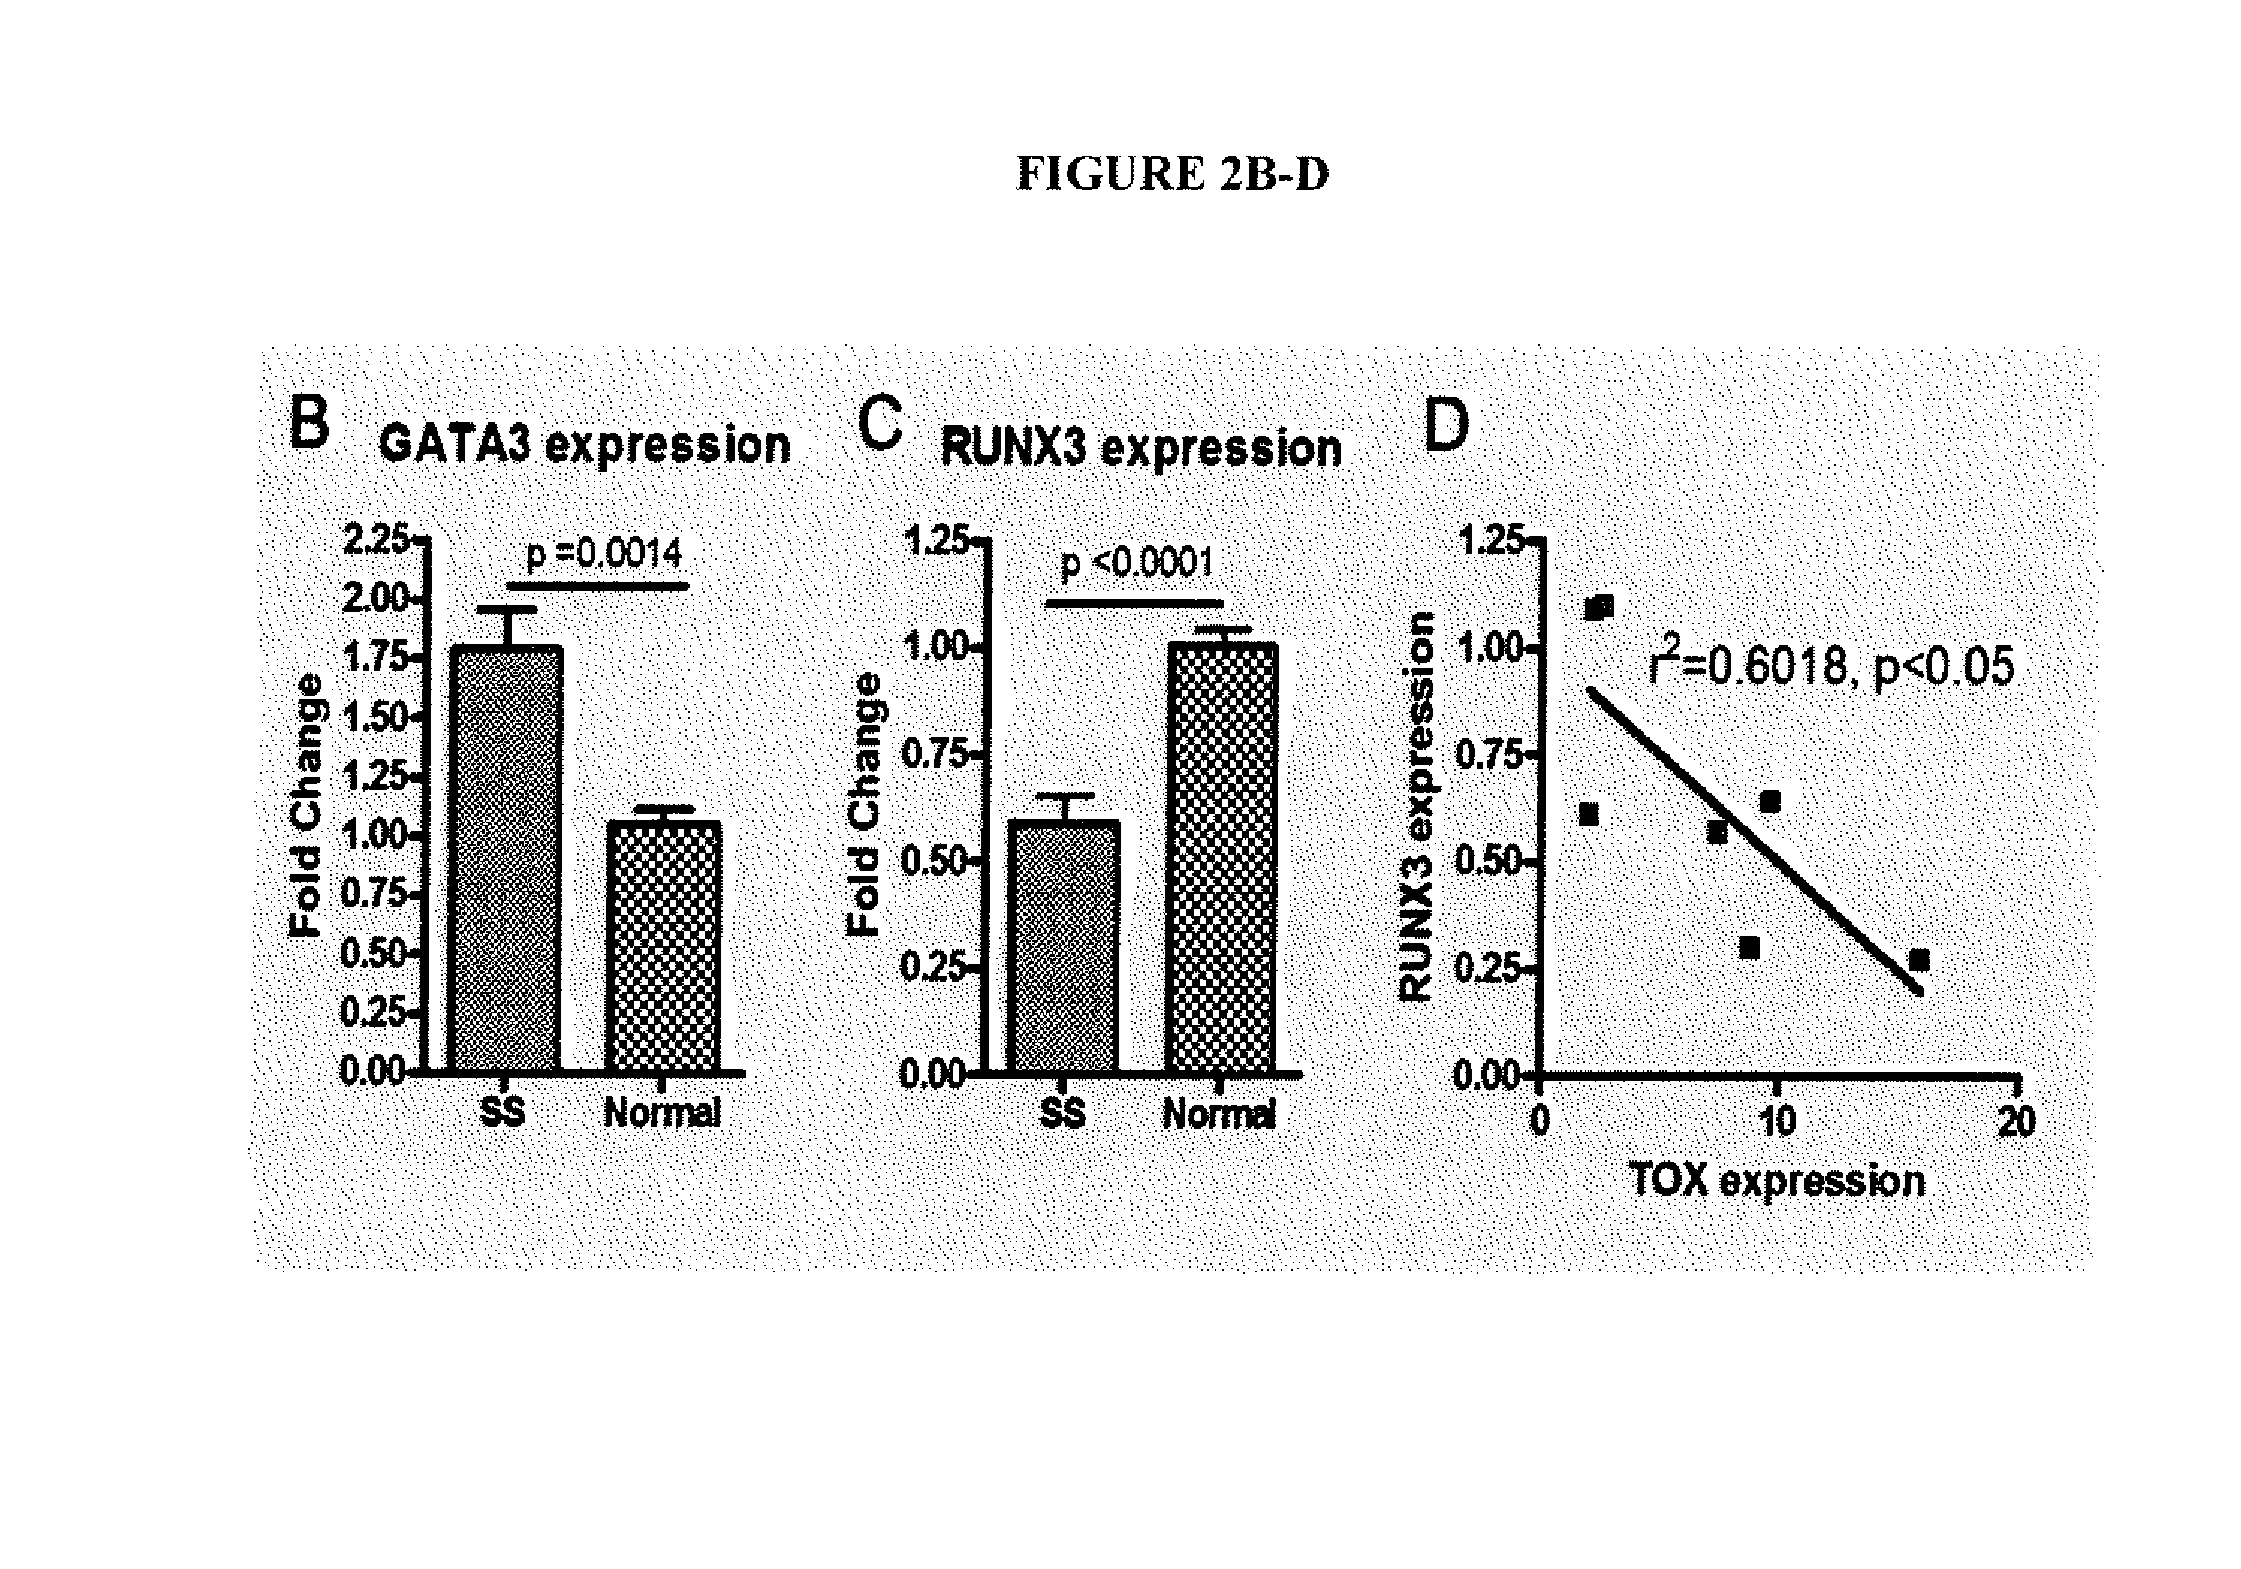 Method for diagnosis, prognosis and determination of treatment for cutaneous t-cell lymphoma